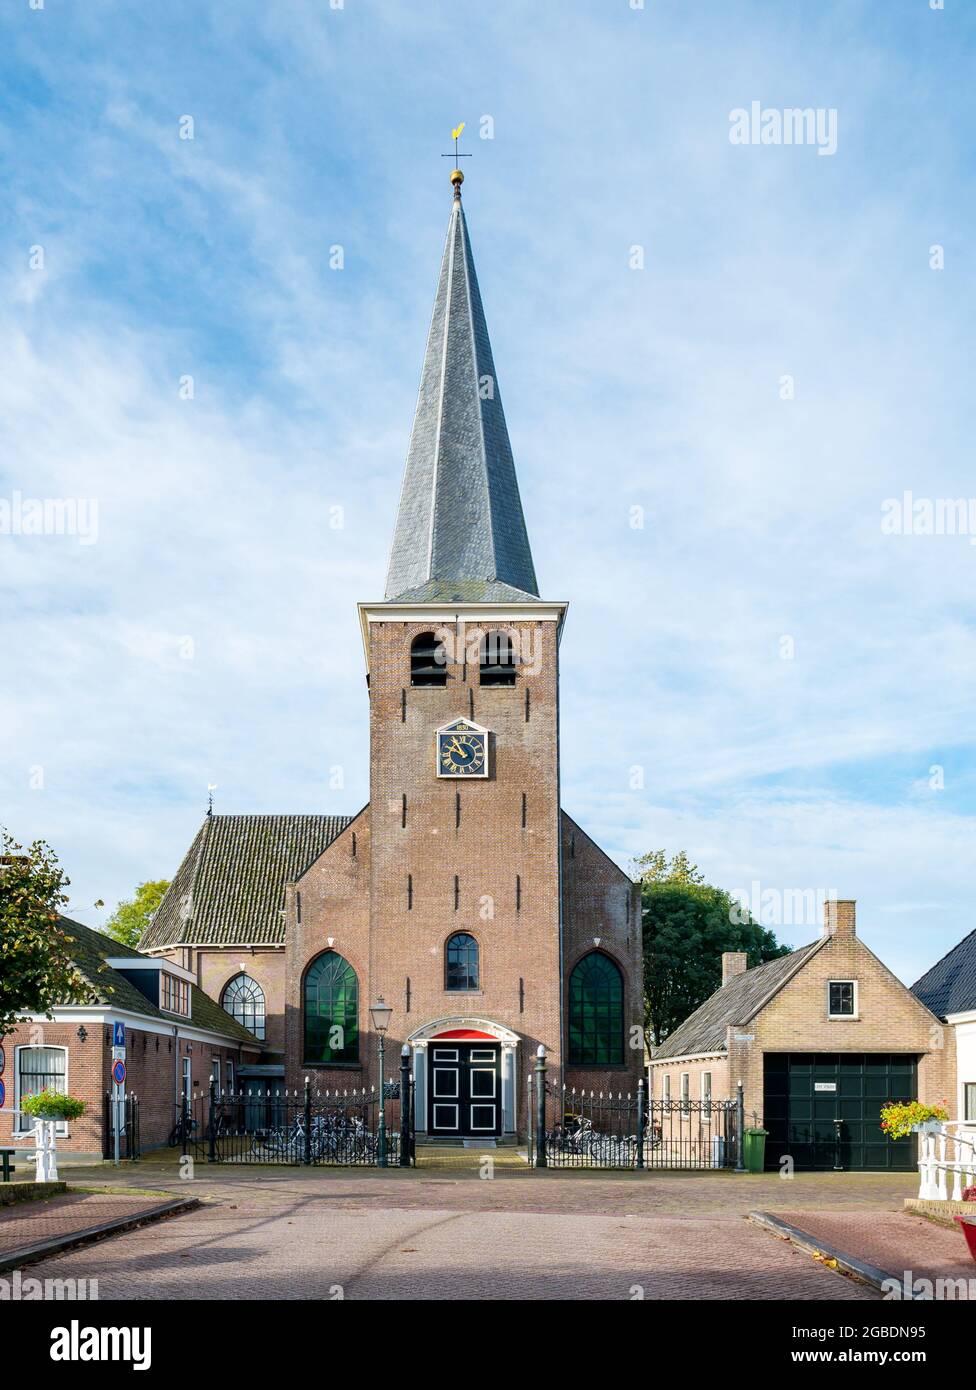 Building of Mauritiuskerk, church with tower in city of IJlst, Friesland, Netherlands Stock Photo